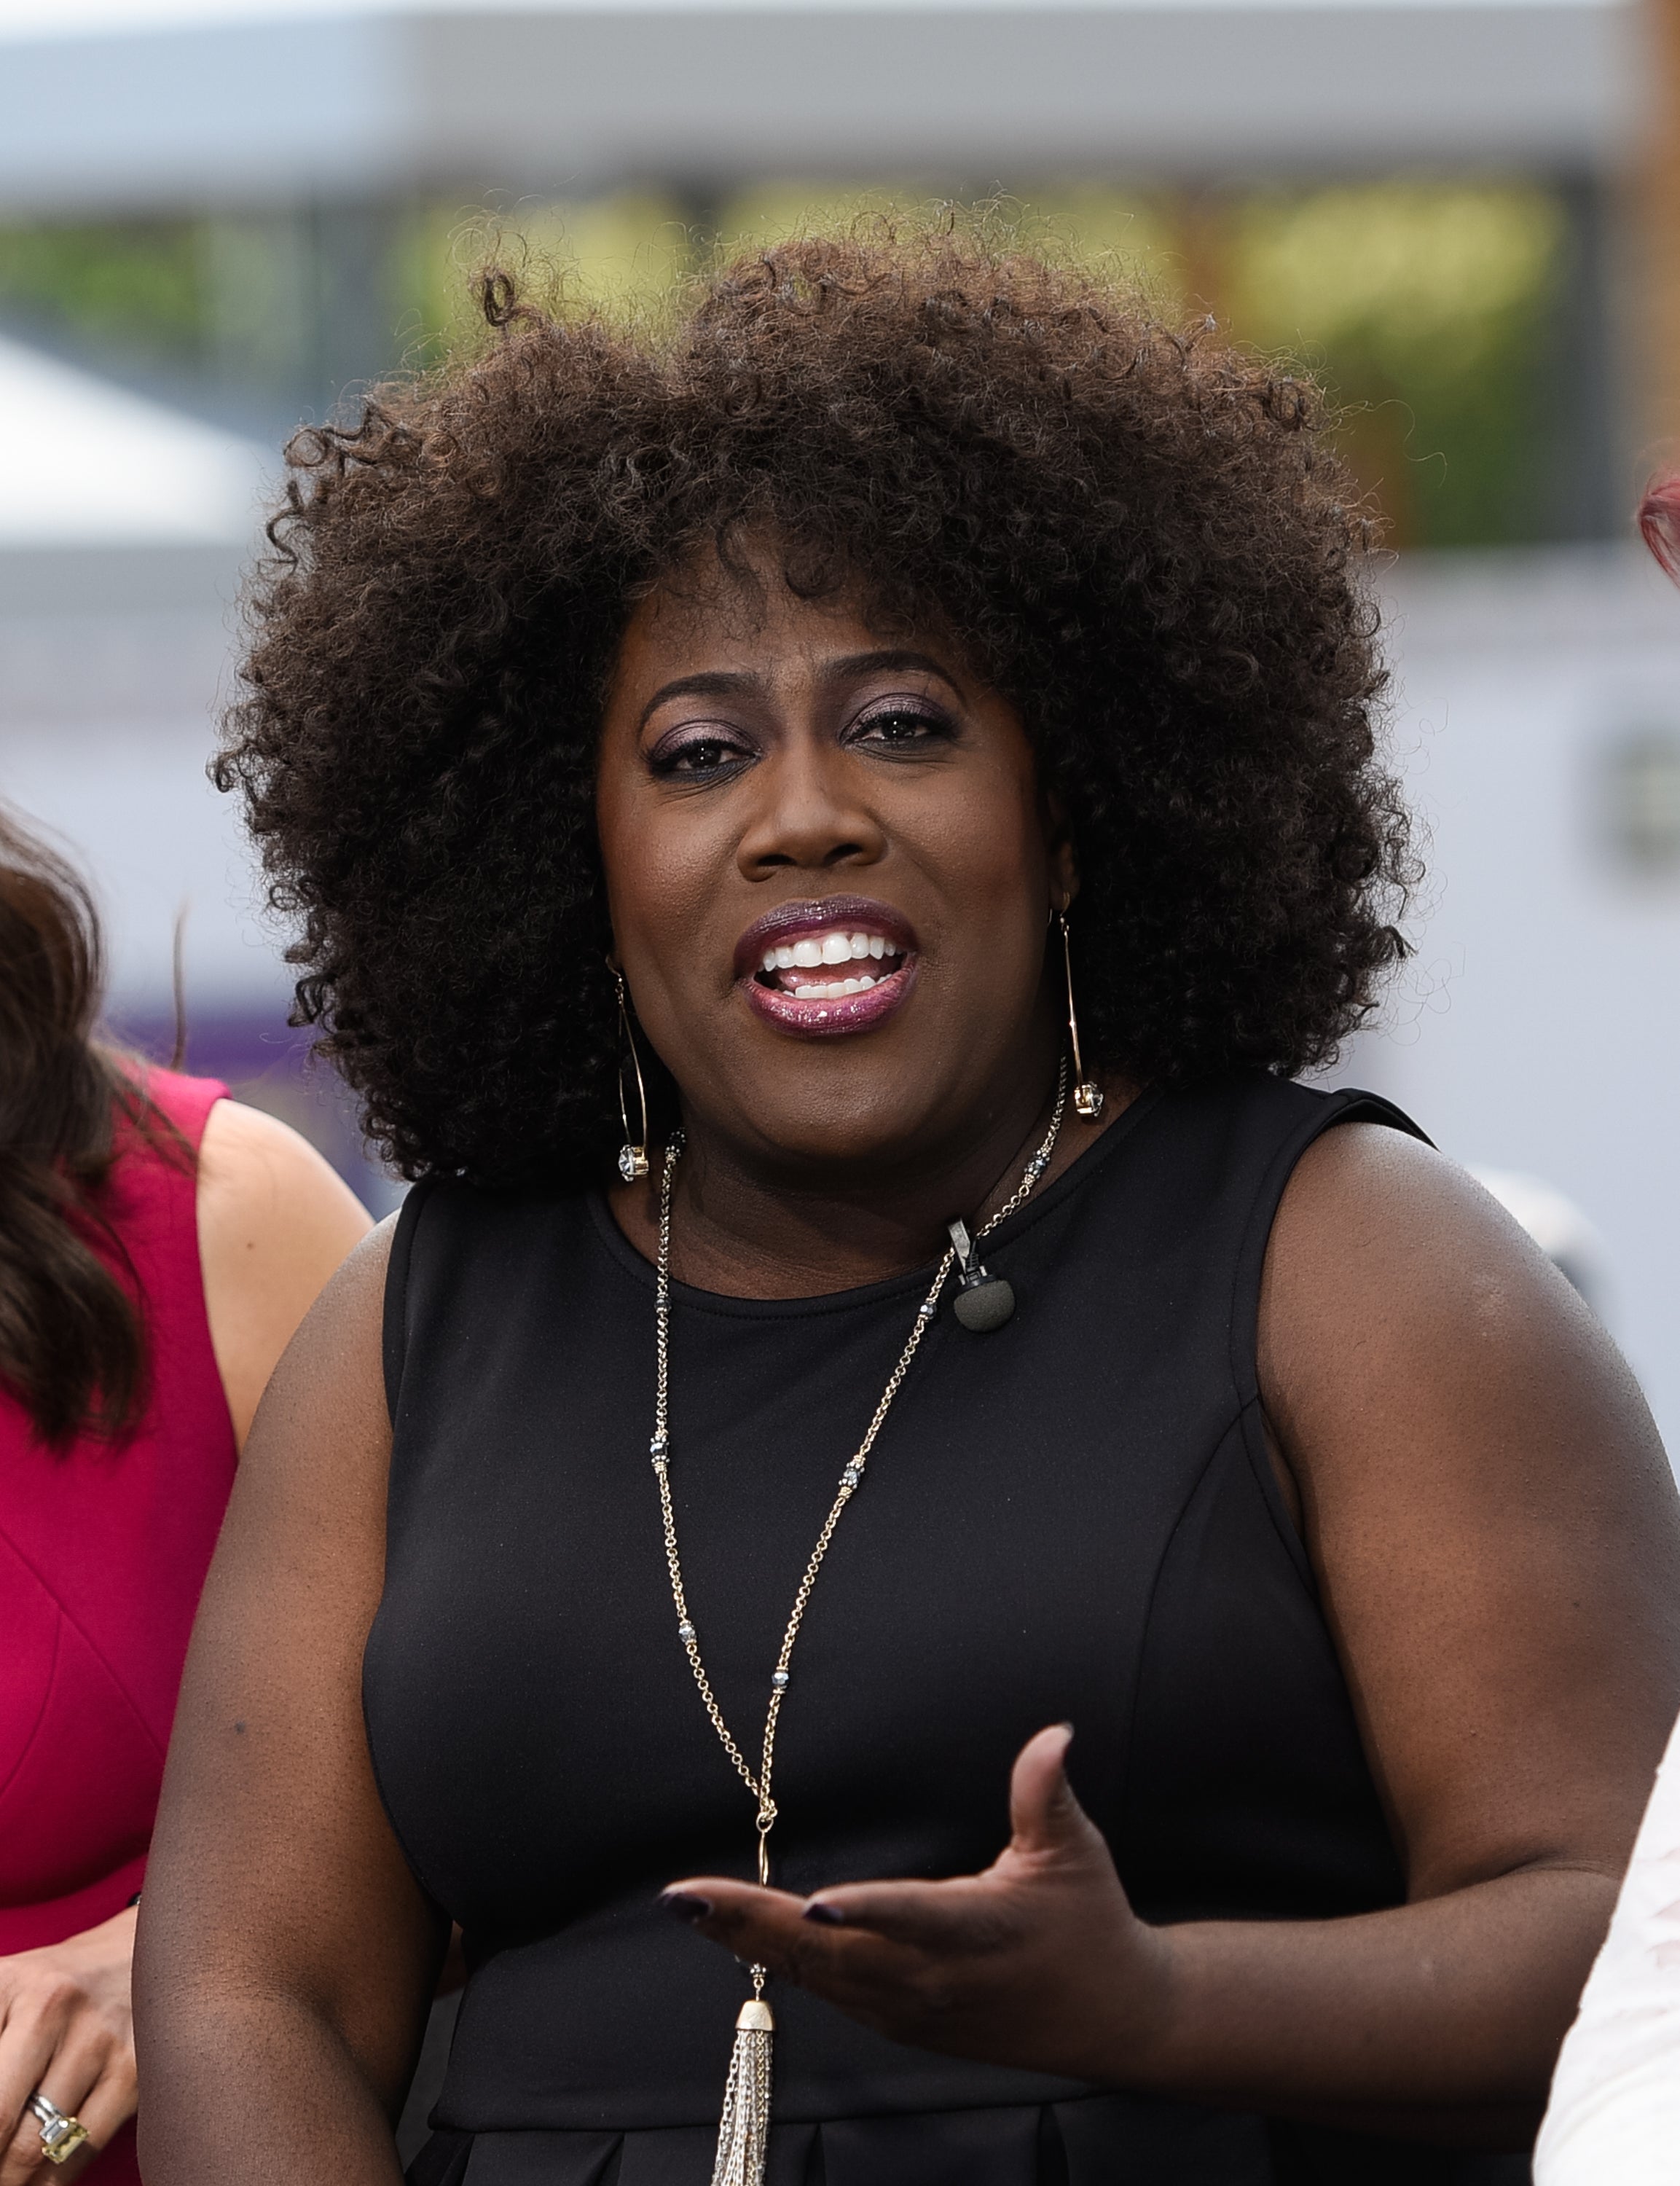 Sheryl Underwood Says She's Concerned About Mo’Nique Following Her Outburst
